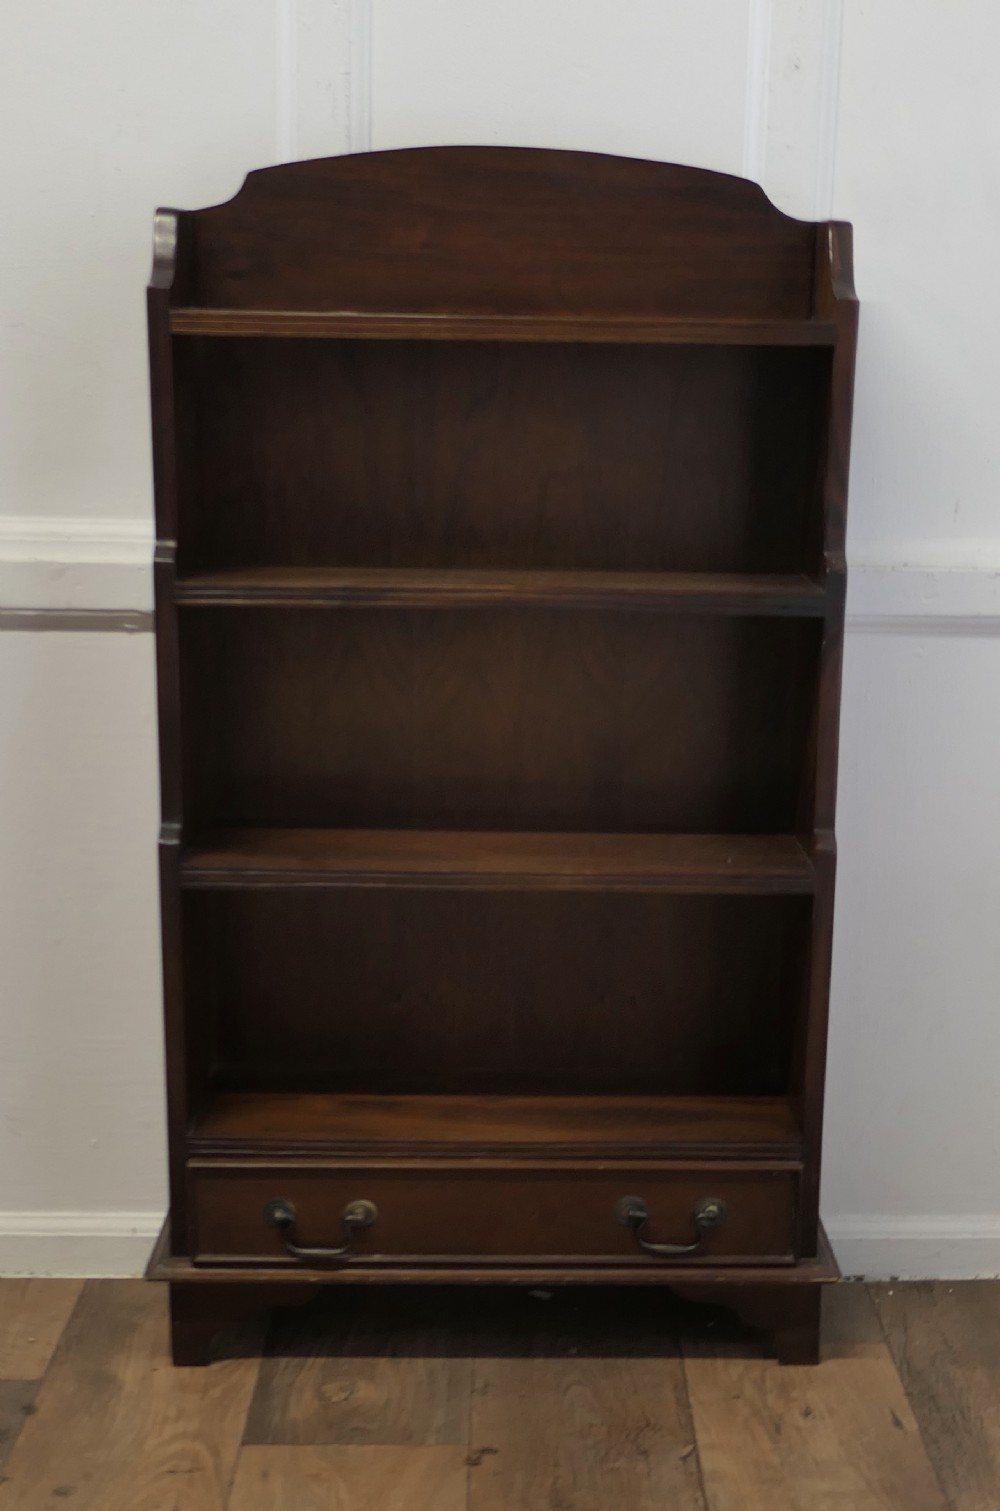 art deco walnut book case with a drawer at the bottom